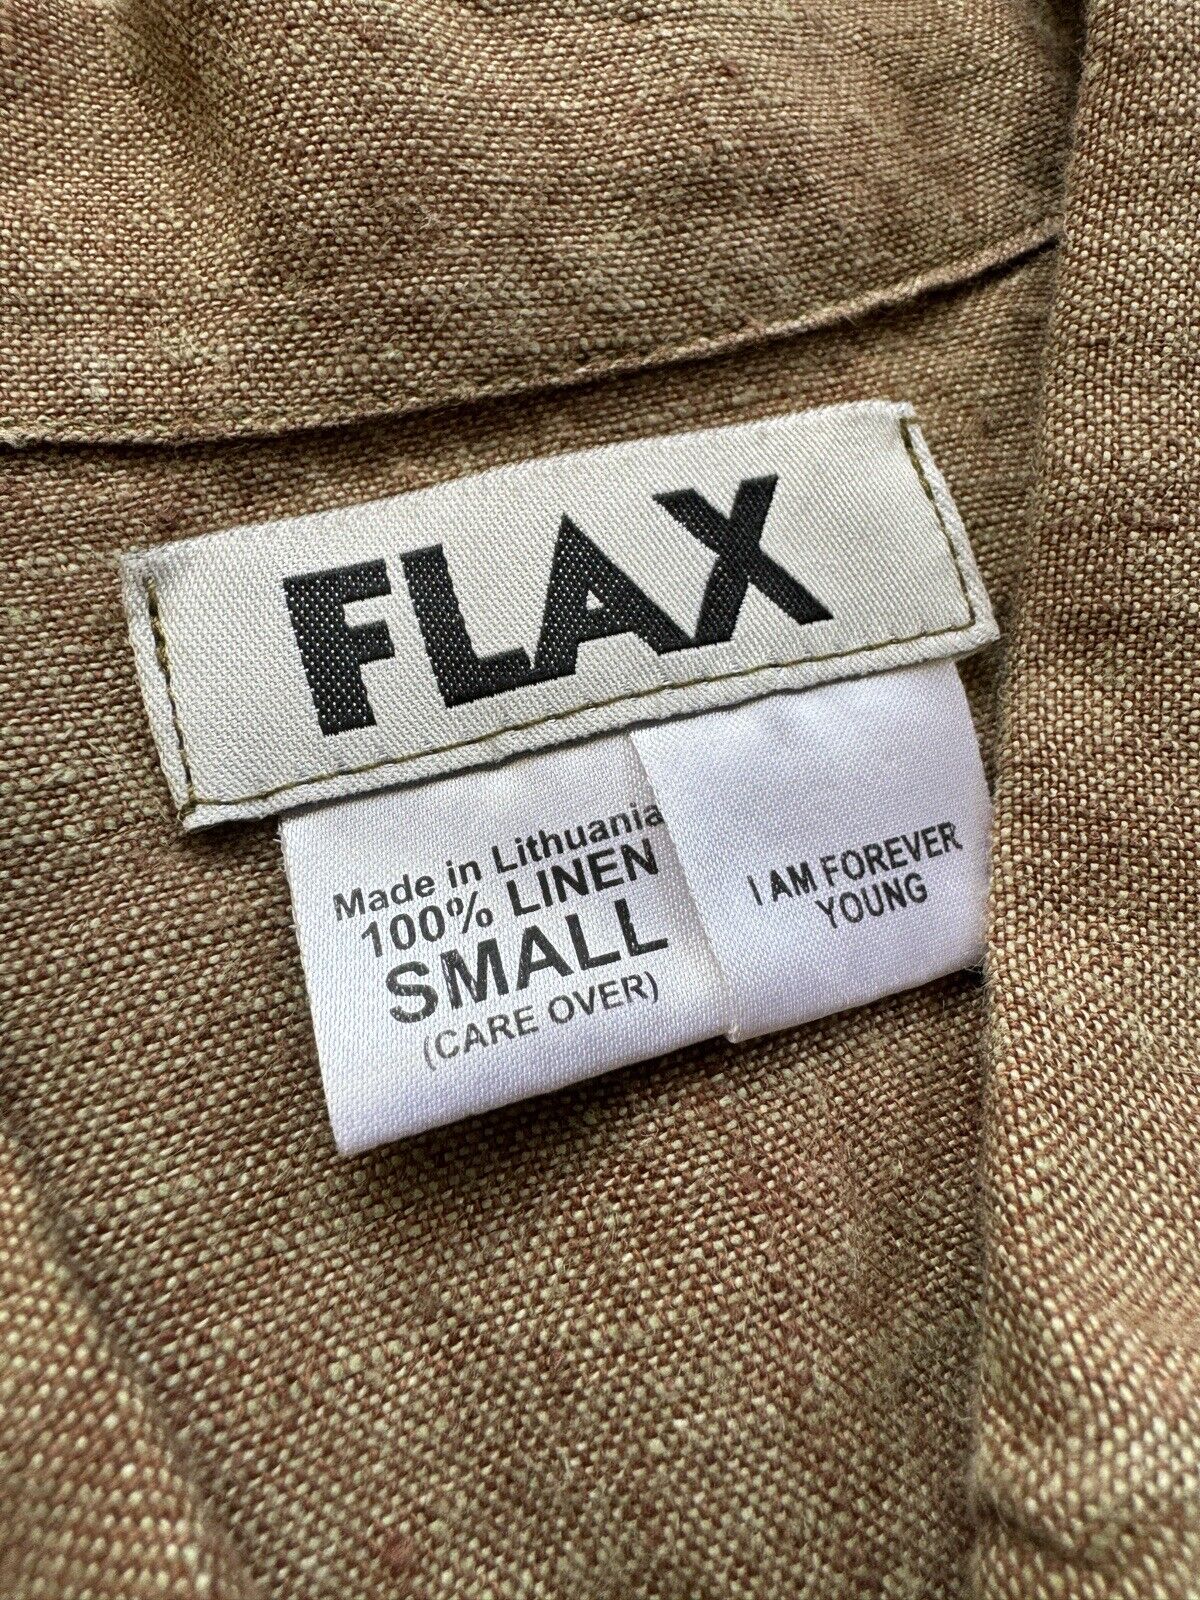 FLAX 100% Linen Top Button Front Shirt Brown Women’s Size Small Oversized